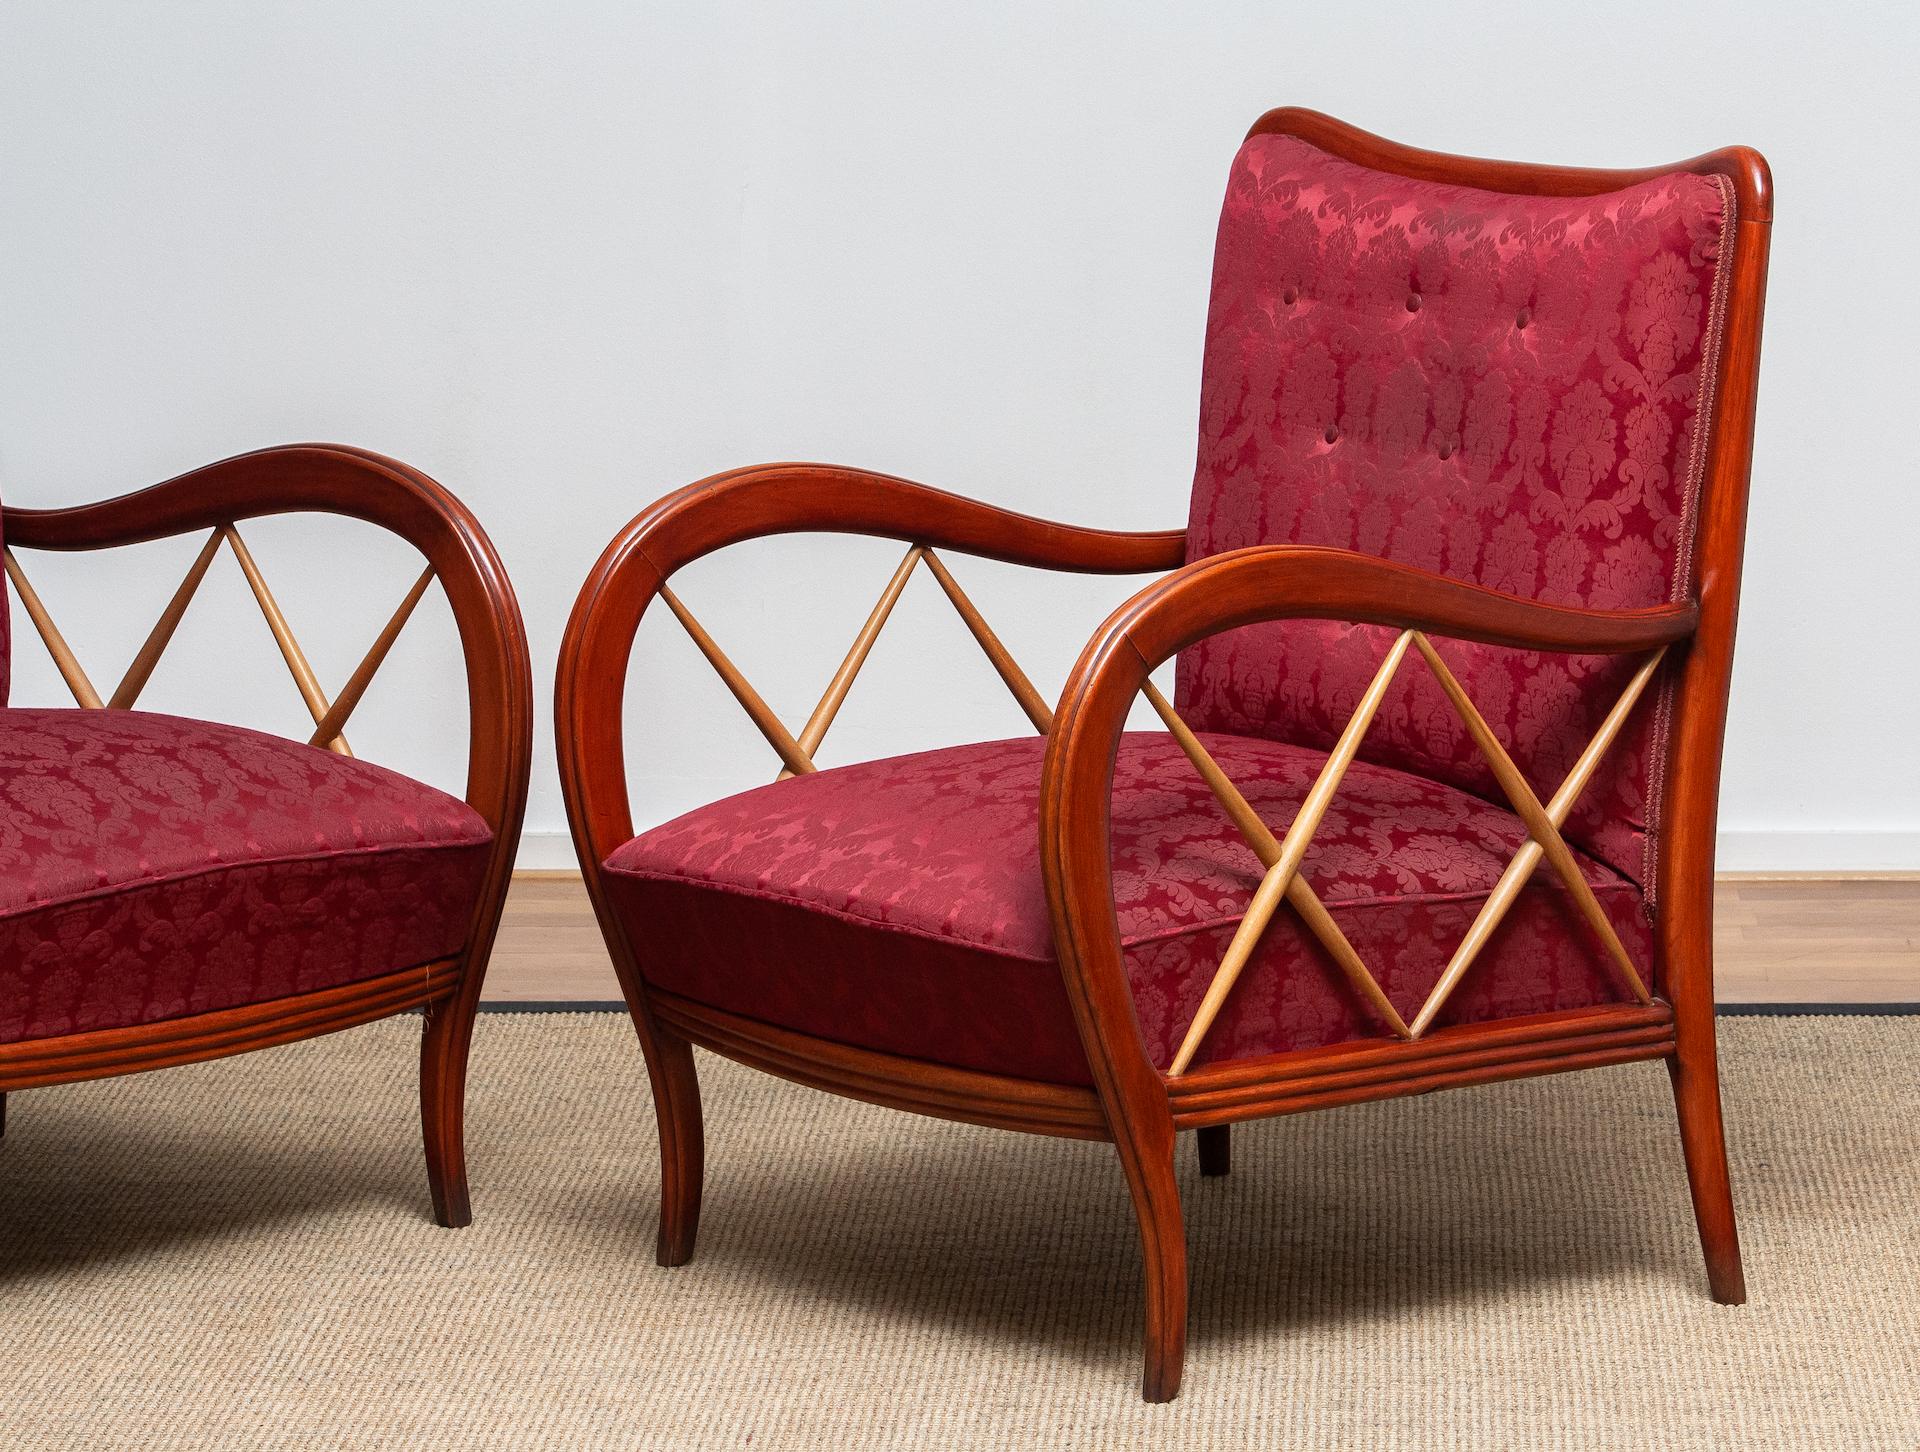 Set of two Italian lounge / easy chairs by Paolo Buffa from the 1940s.
The condition is original and still good.